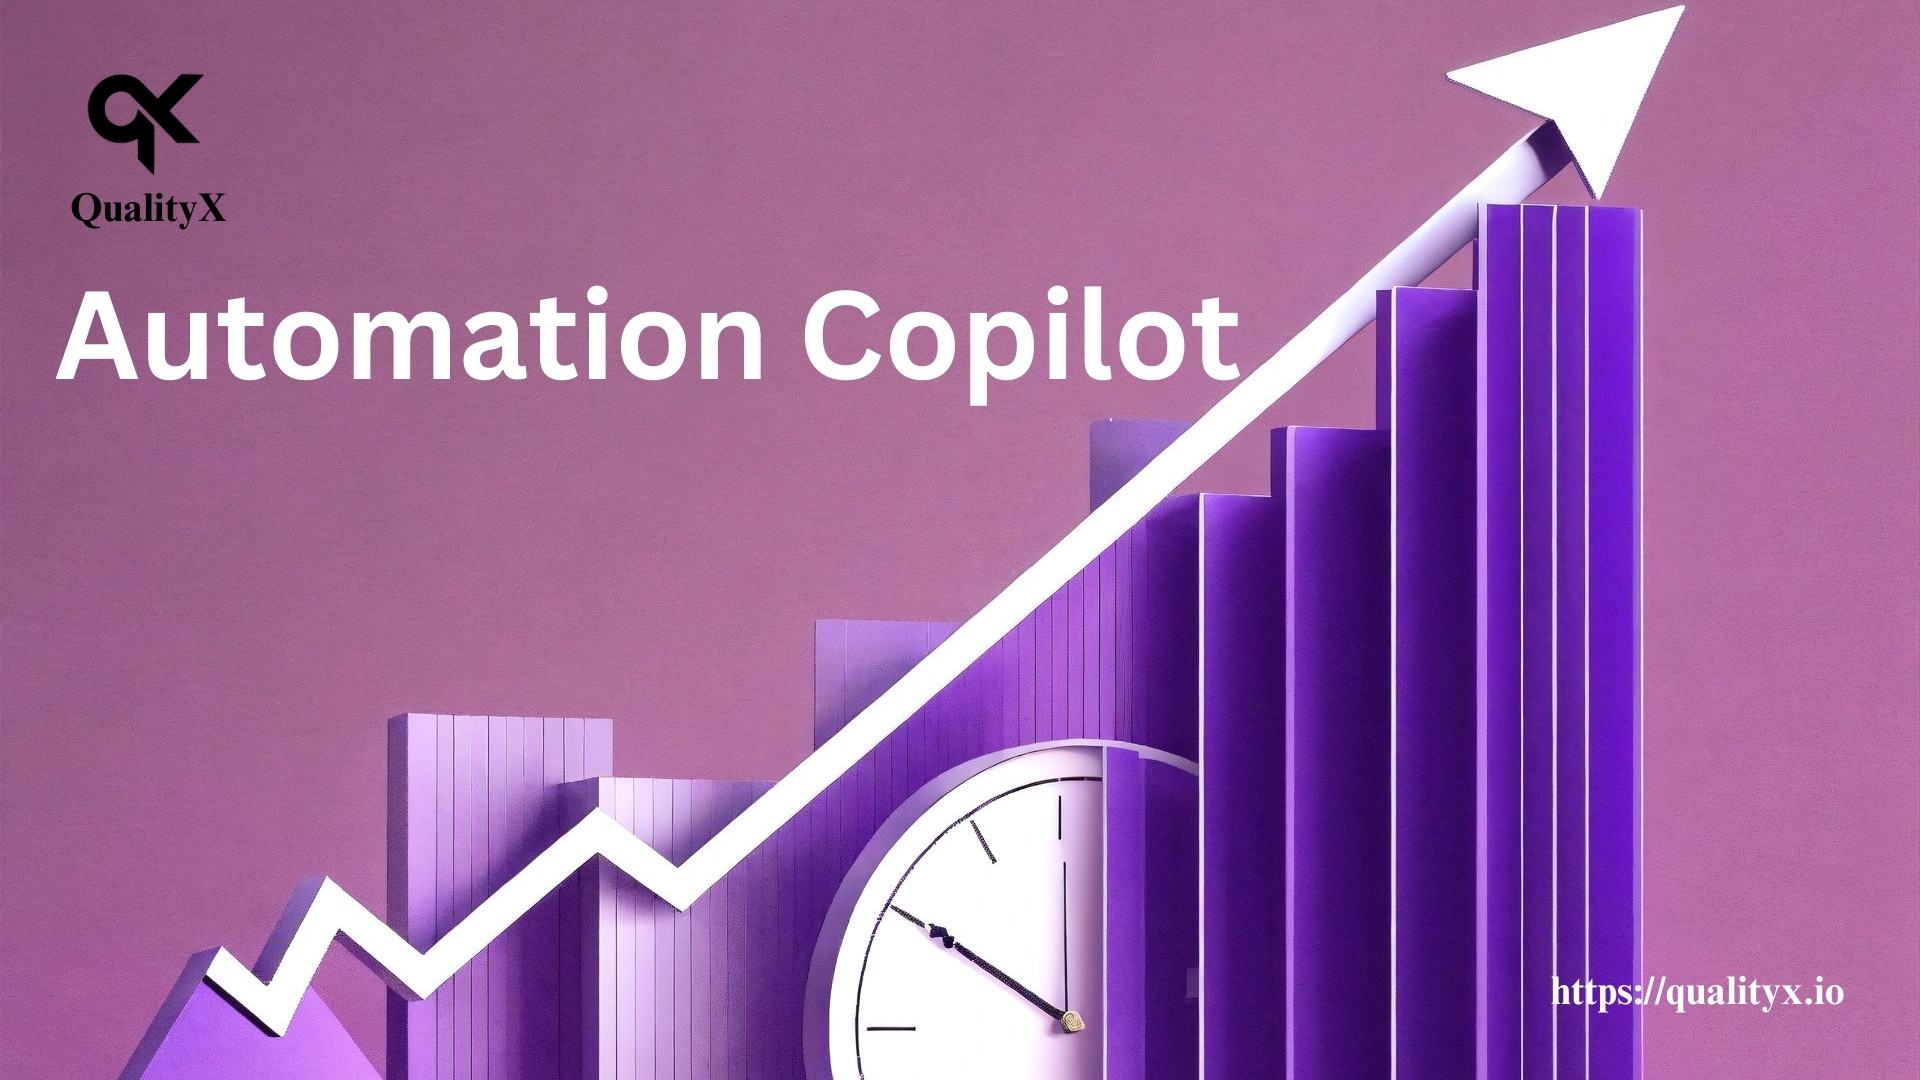 Utilizing 'Automation Copilot' for fostering growth.